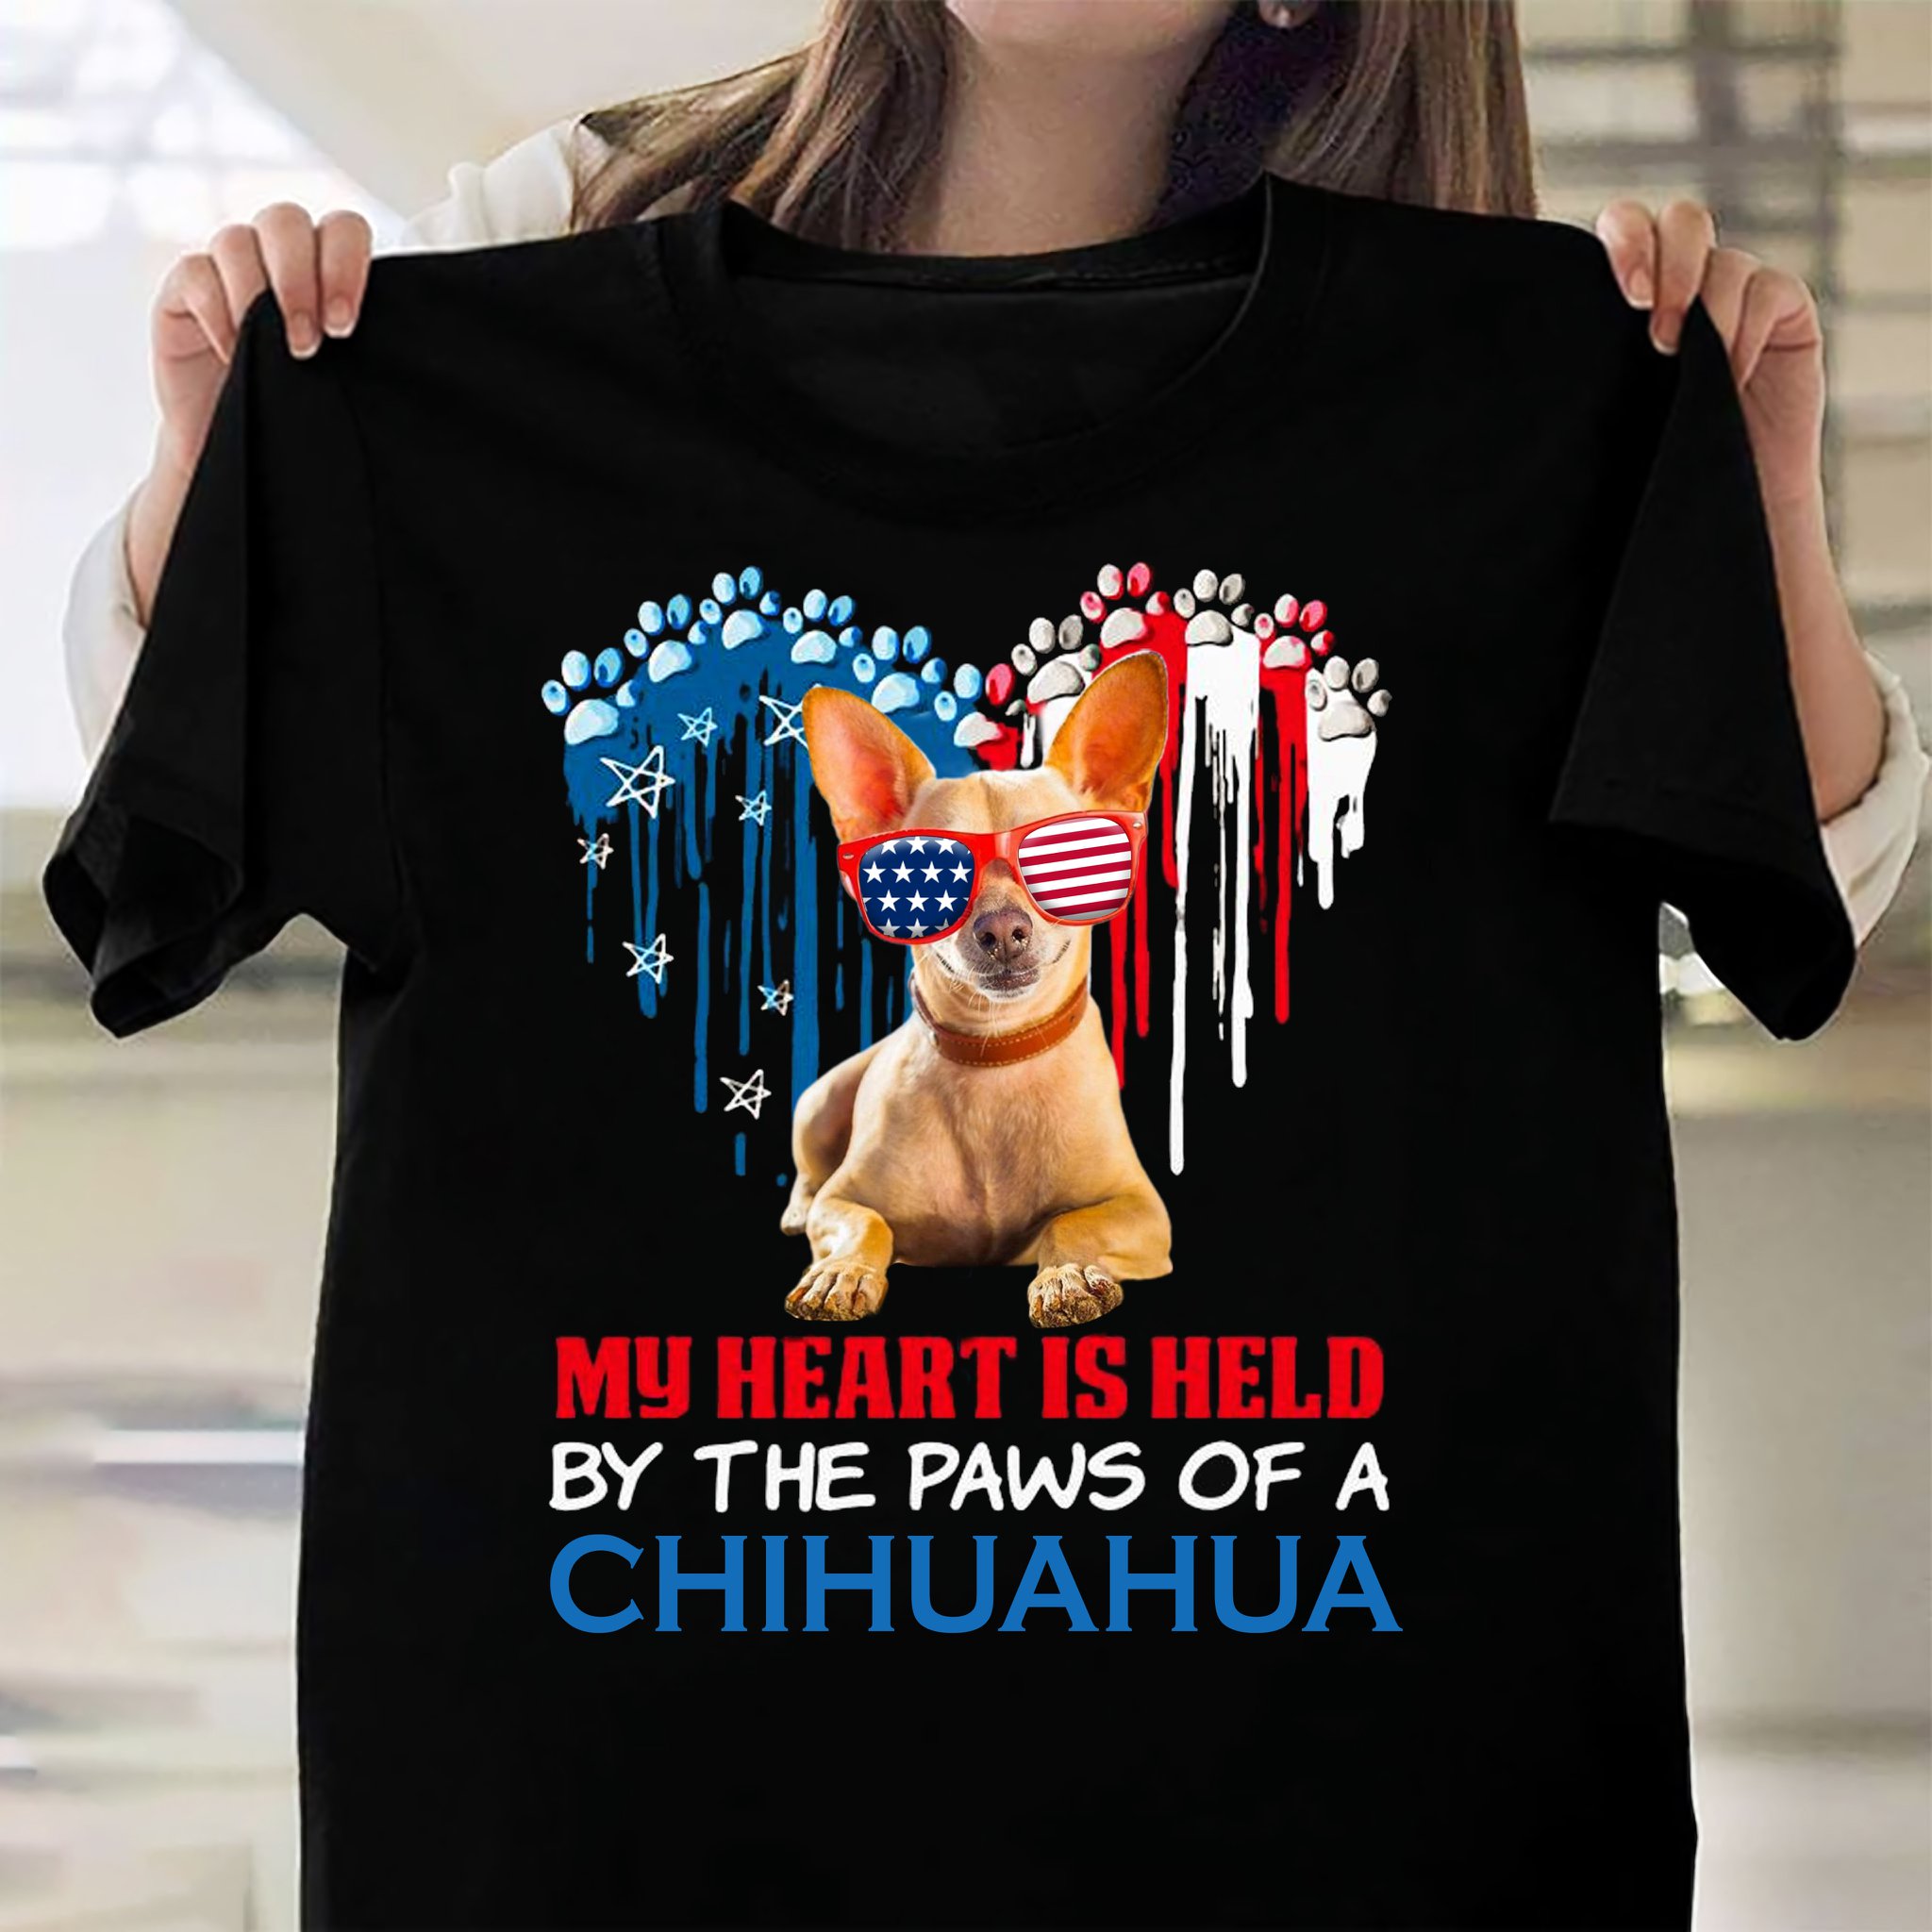 Chihuahua Heart America - My heart is held by the paws of a chihuahua